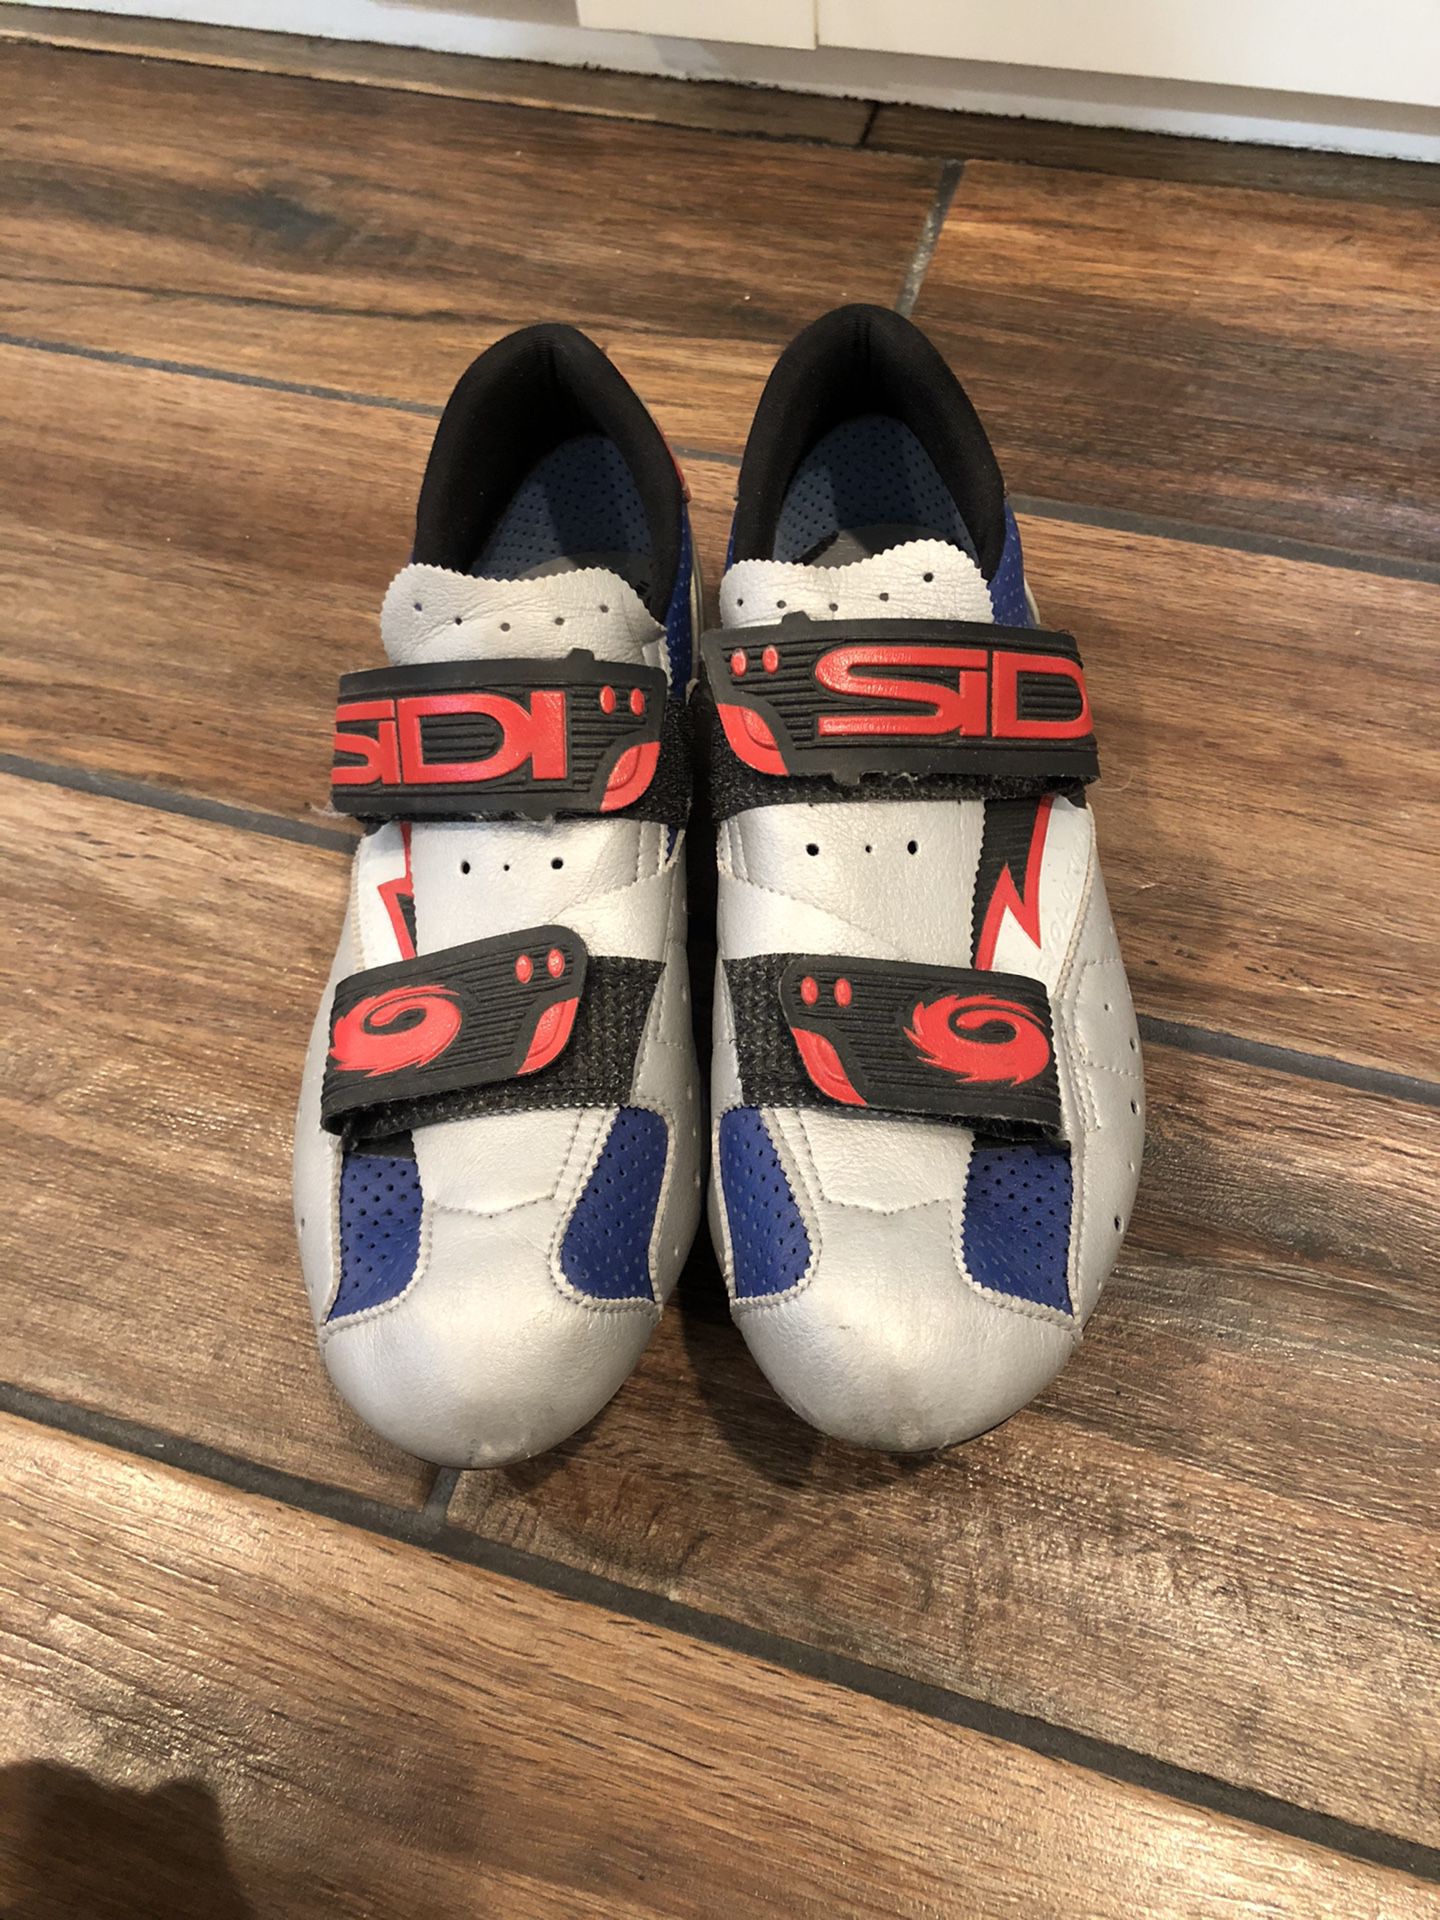 Spin shoes - size 7